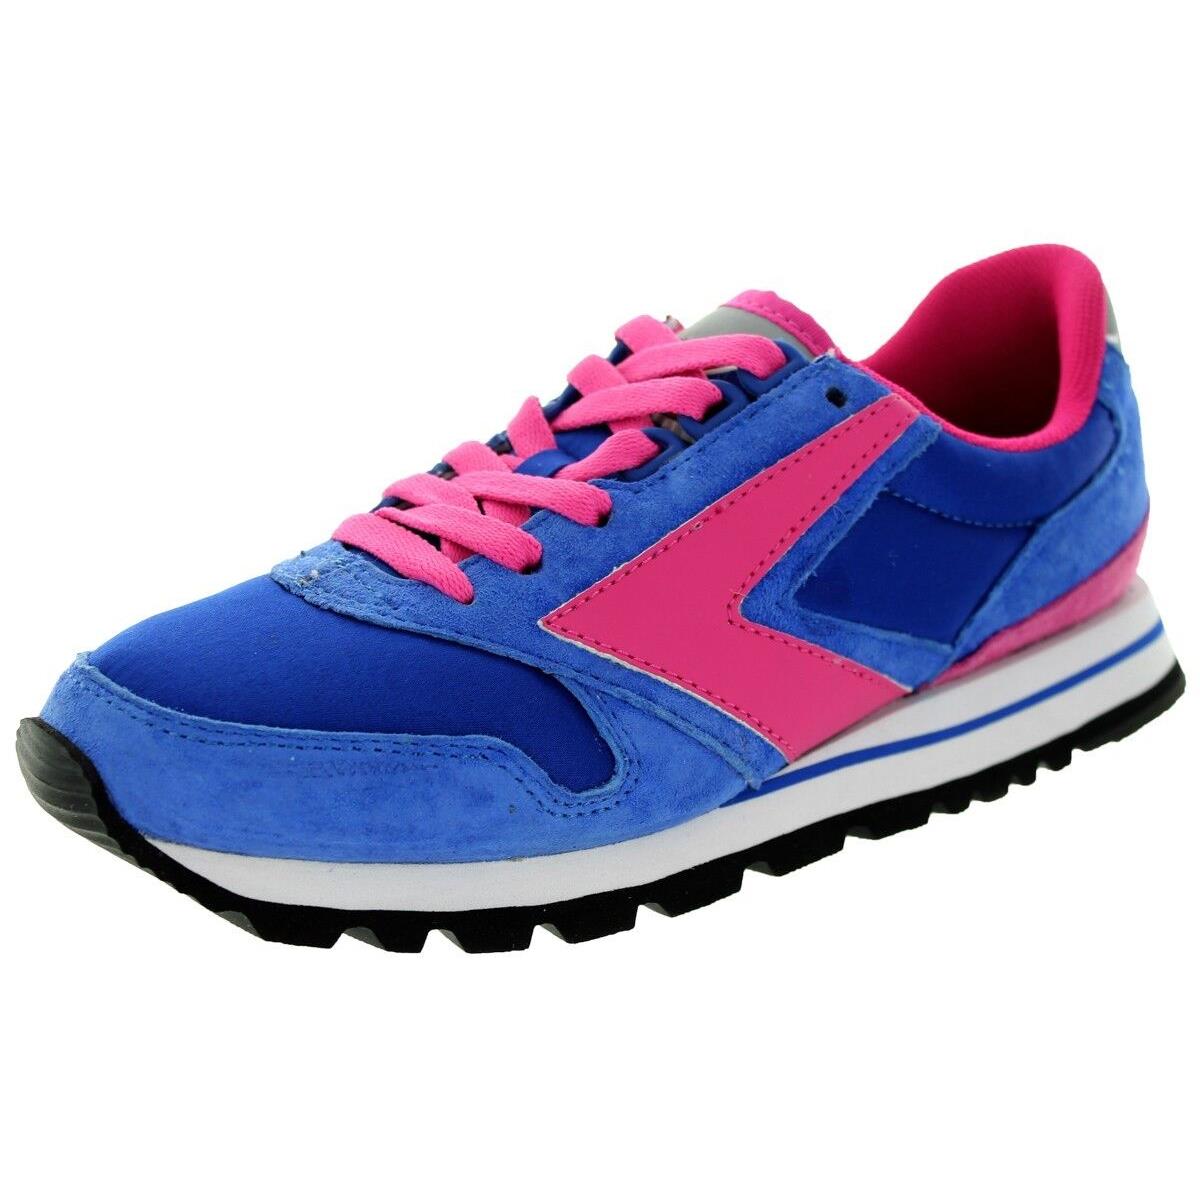 Brooks Heritage Chariot Women 496 Blue Pink Suede Retro Running Shoes 6 - 10 - PINK/BLUE